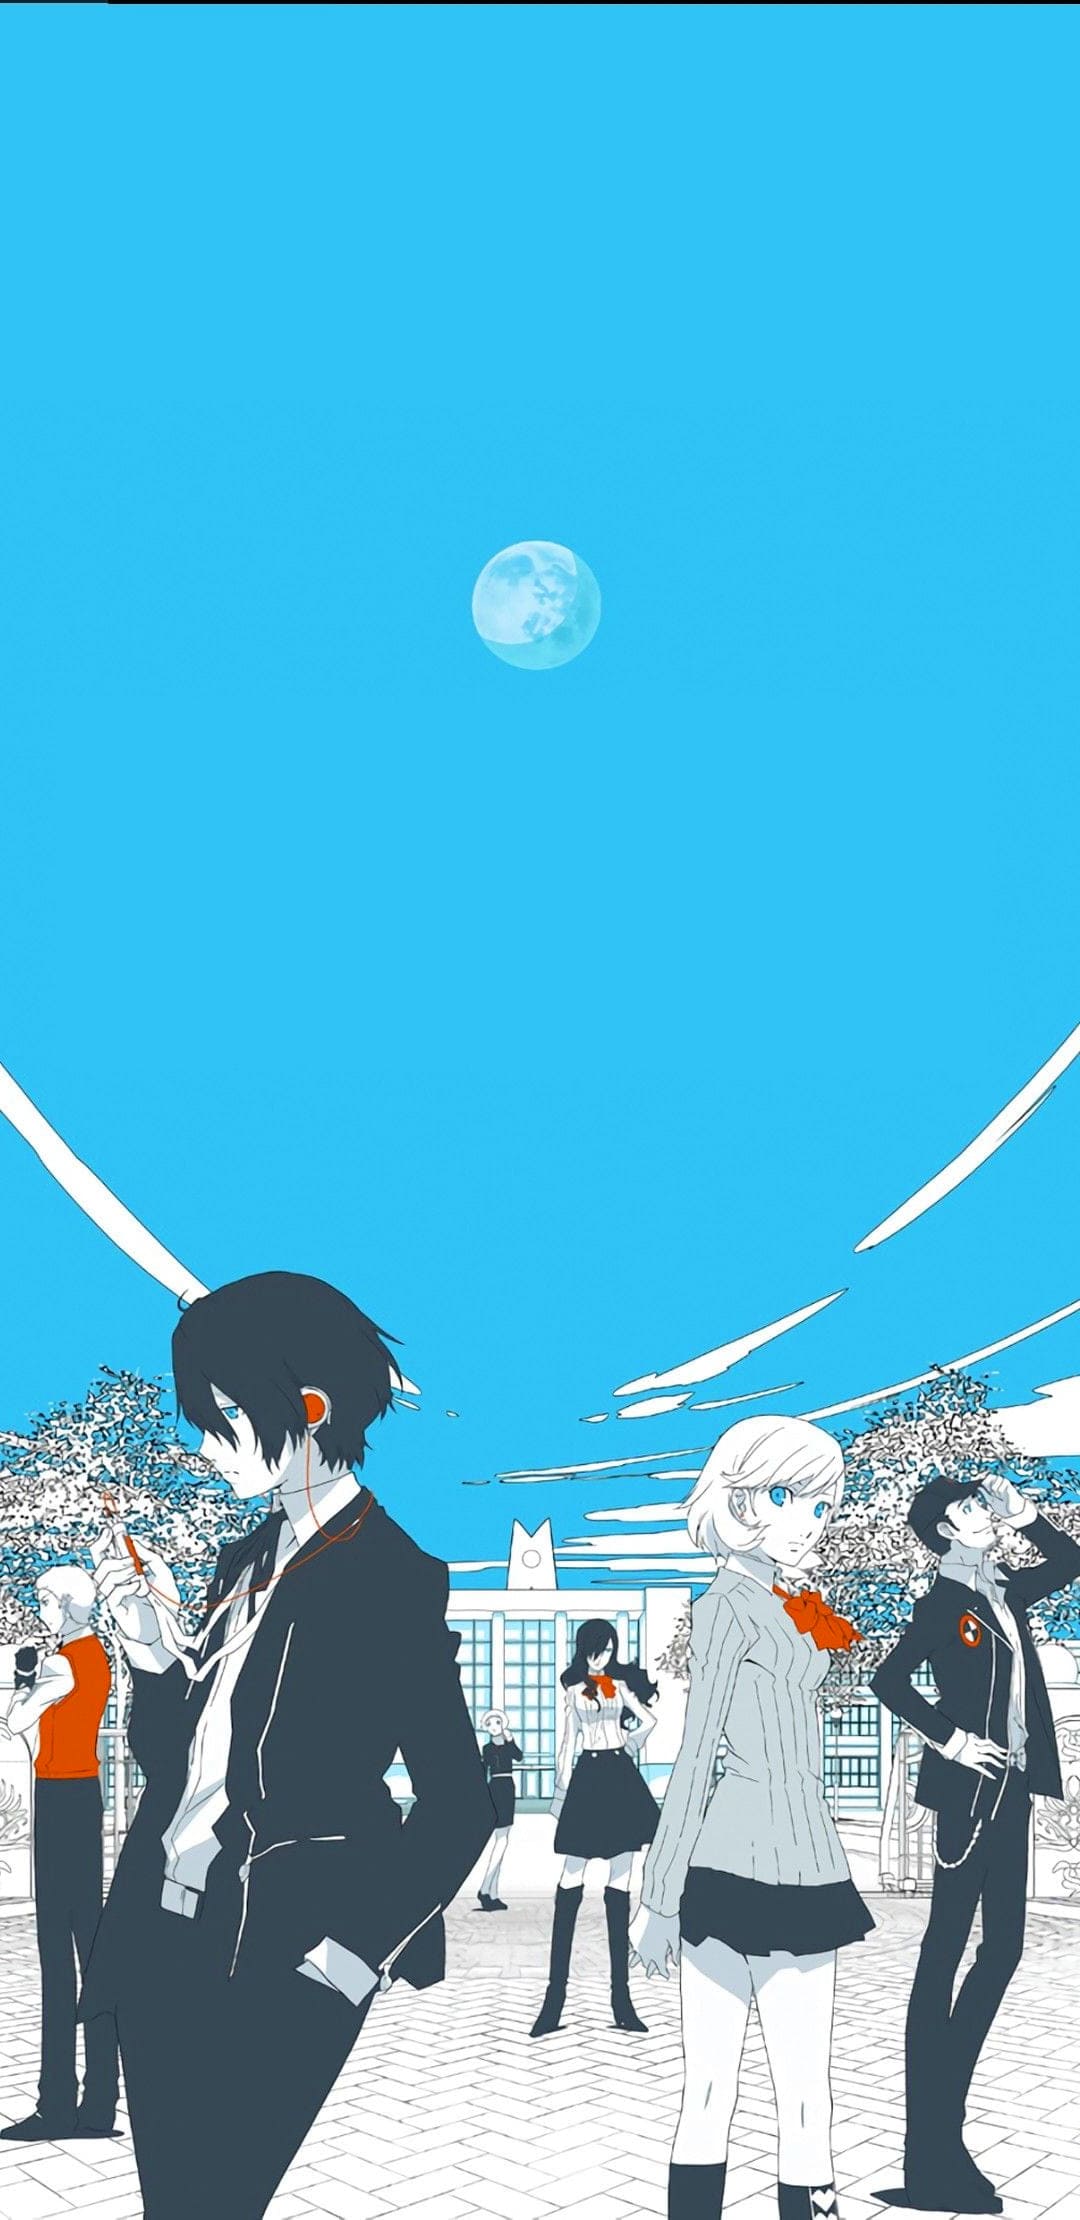 Persona 3 Wallpapers